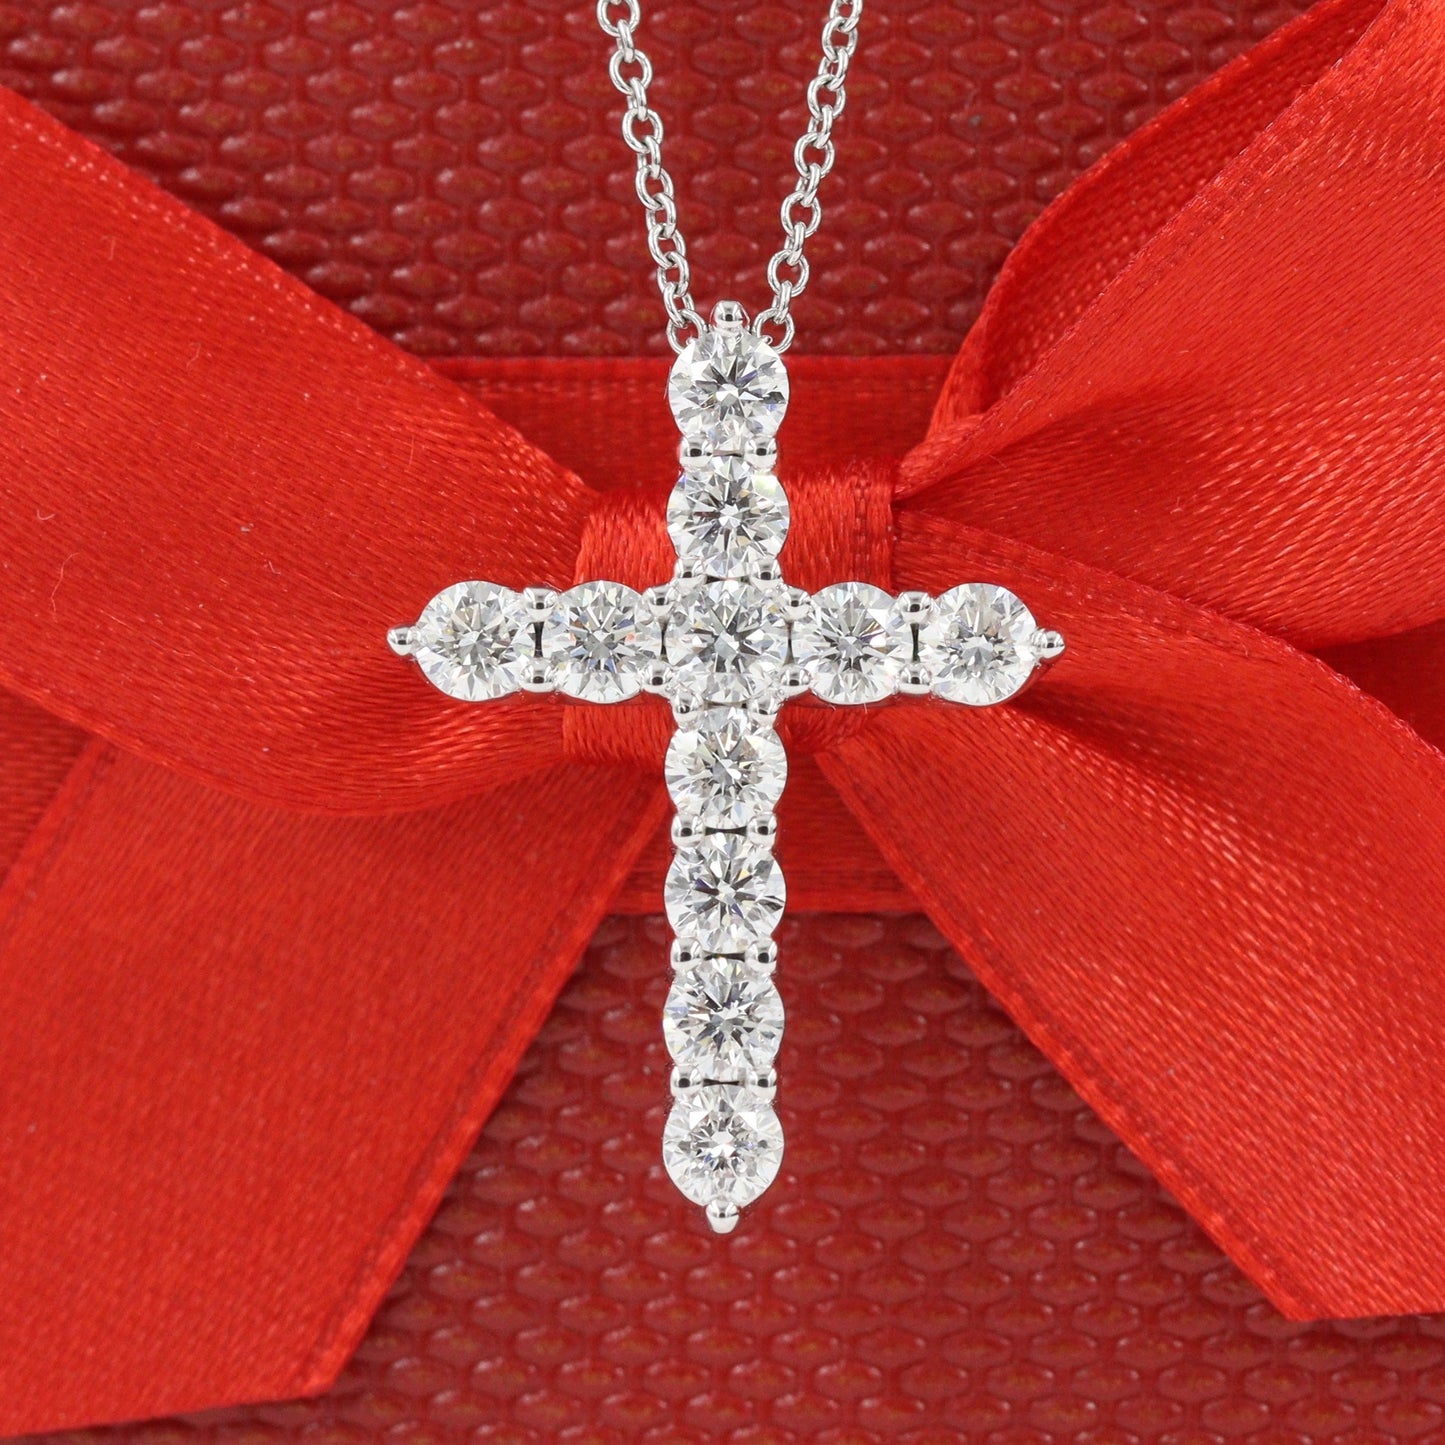 1.5ct Round Diamond Cross Necklace /Luxury Cross Necklace/ Religious/ 14K Gold Cross Necklace/ Adjustable Length/ Gift for Her